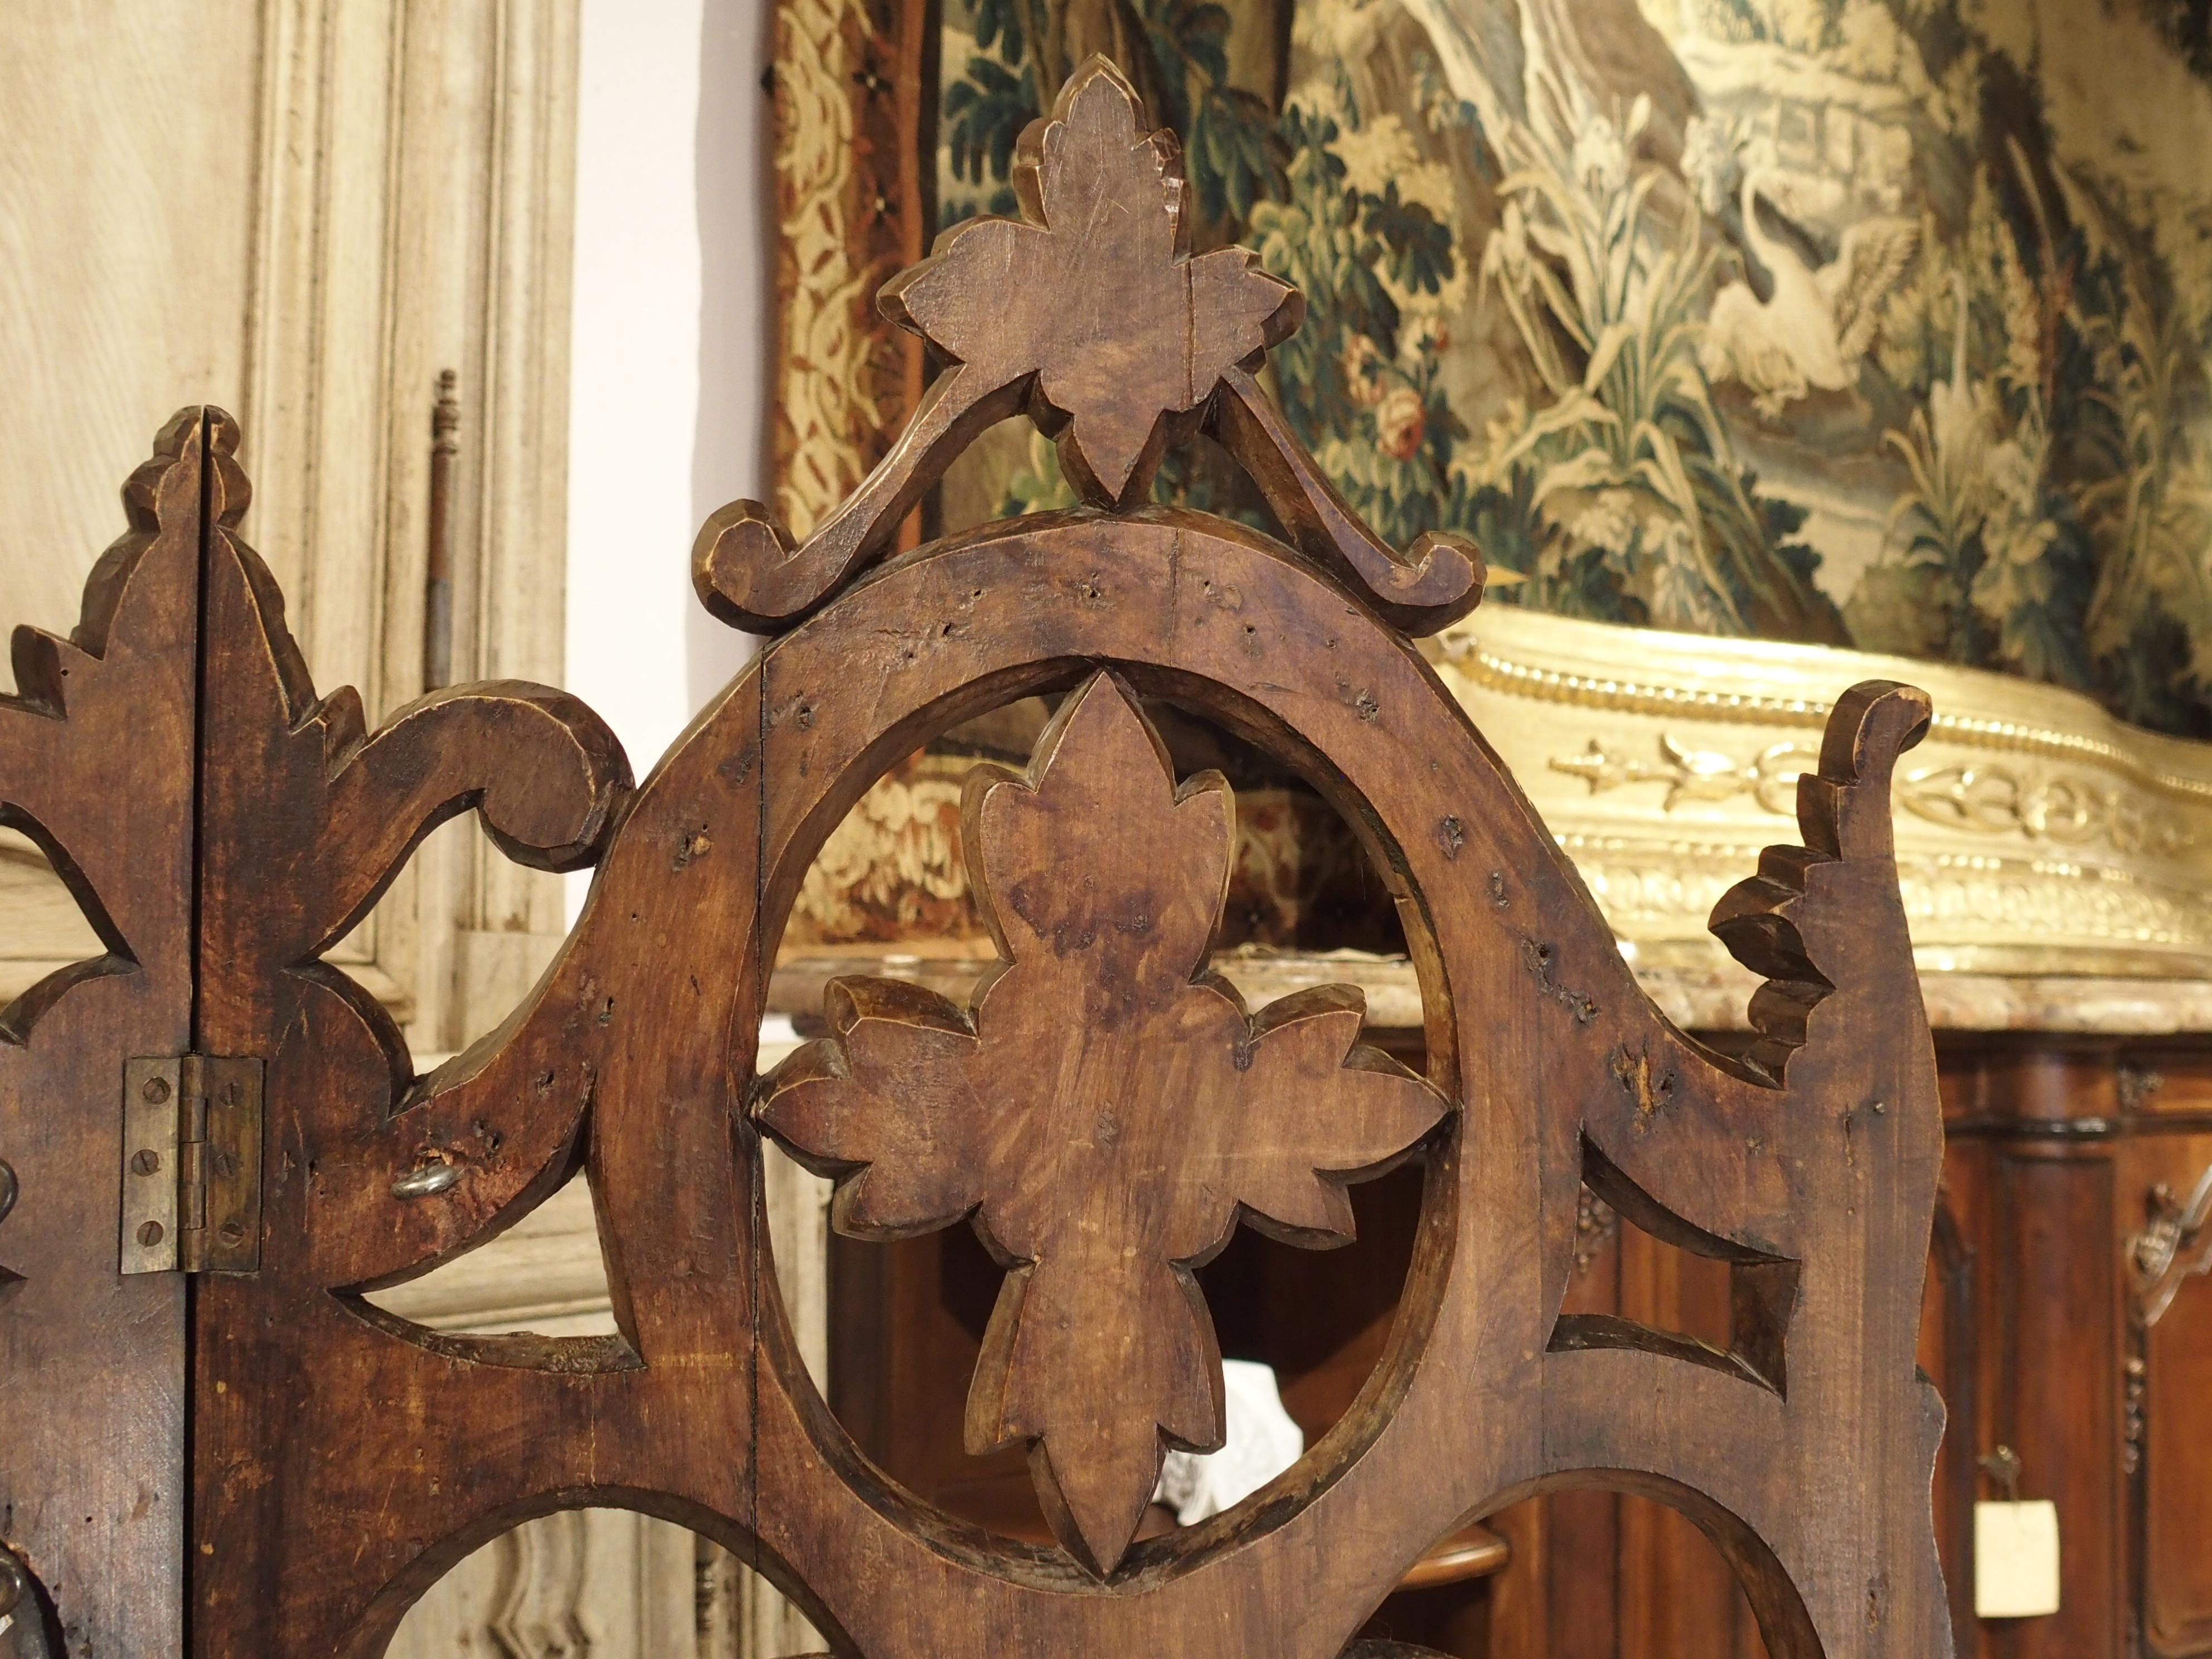 From France, this unusual, three paneled, wooden firescreen has beautiful details of foliate and tree bark motifs, typical of the Black Forest style. There are depictions of wooden branches and twigs in C-and S-scroll, Fleur-de-Lis, and acanthus